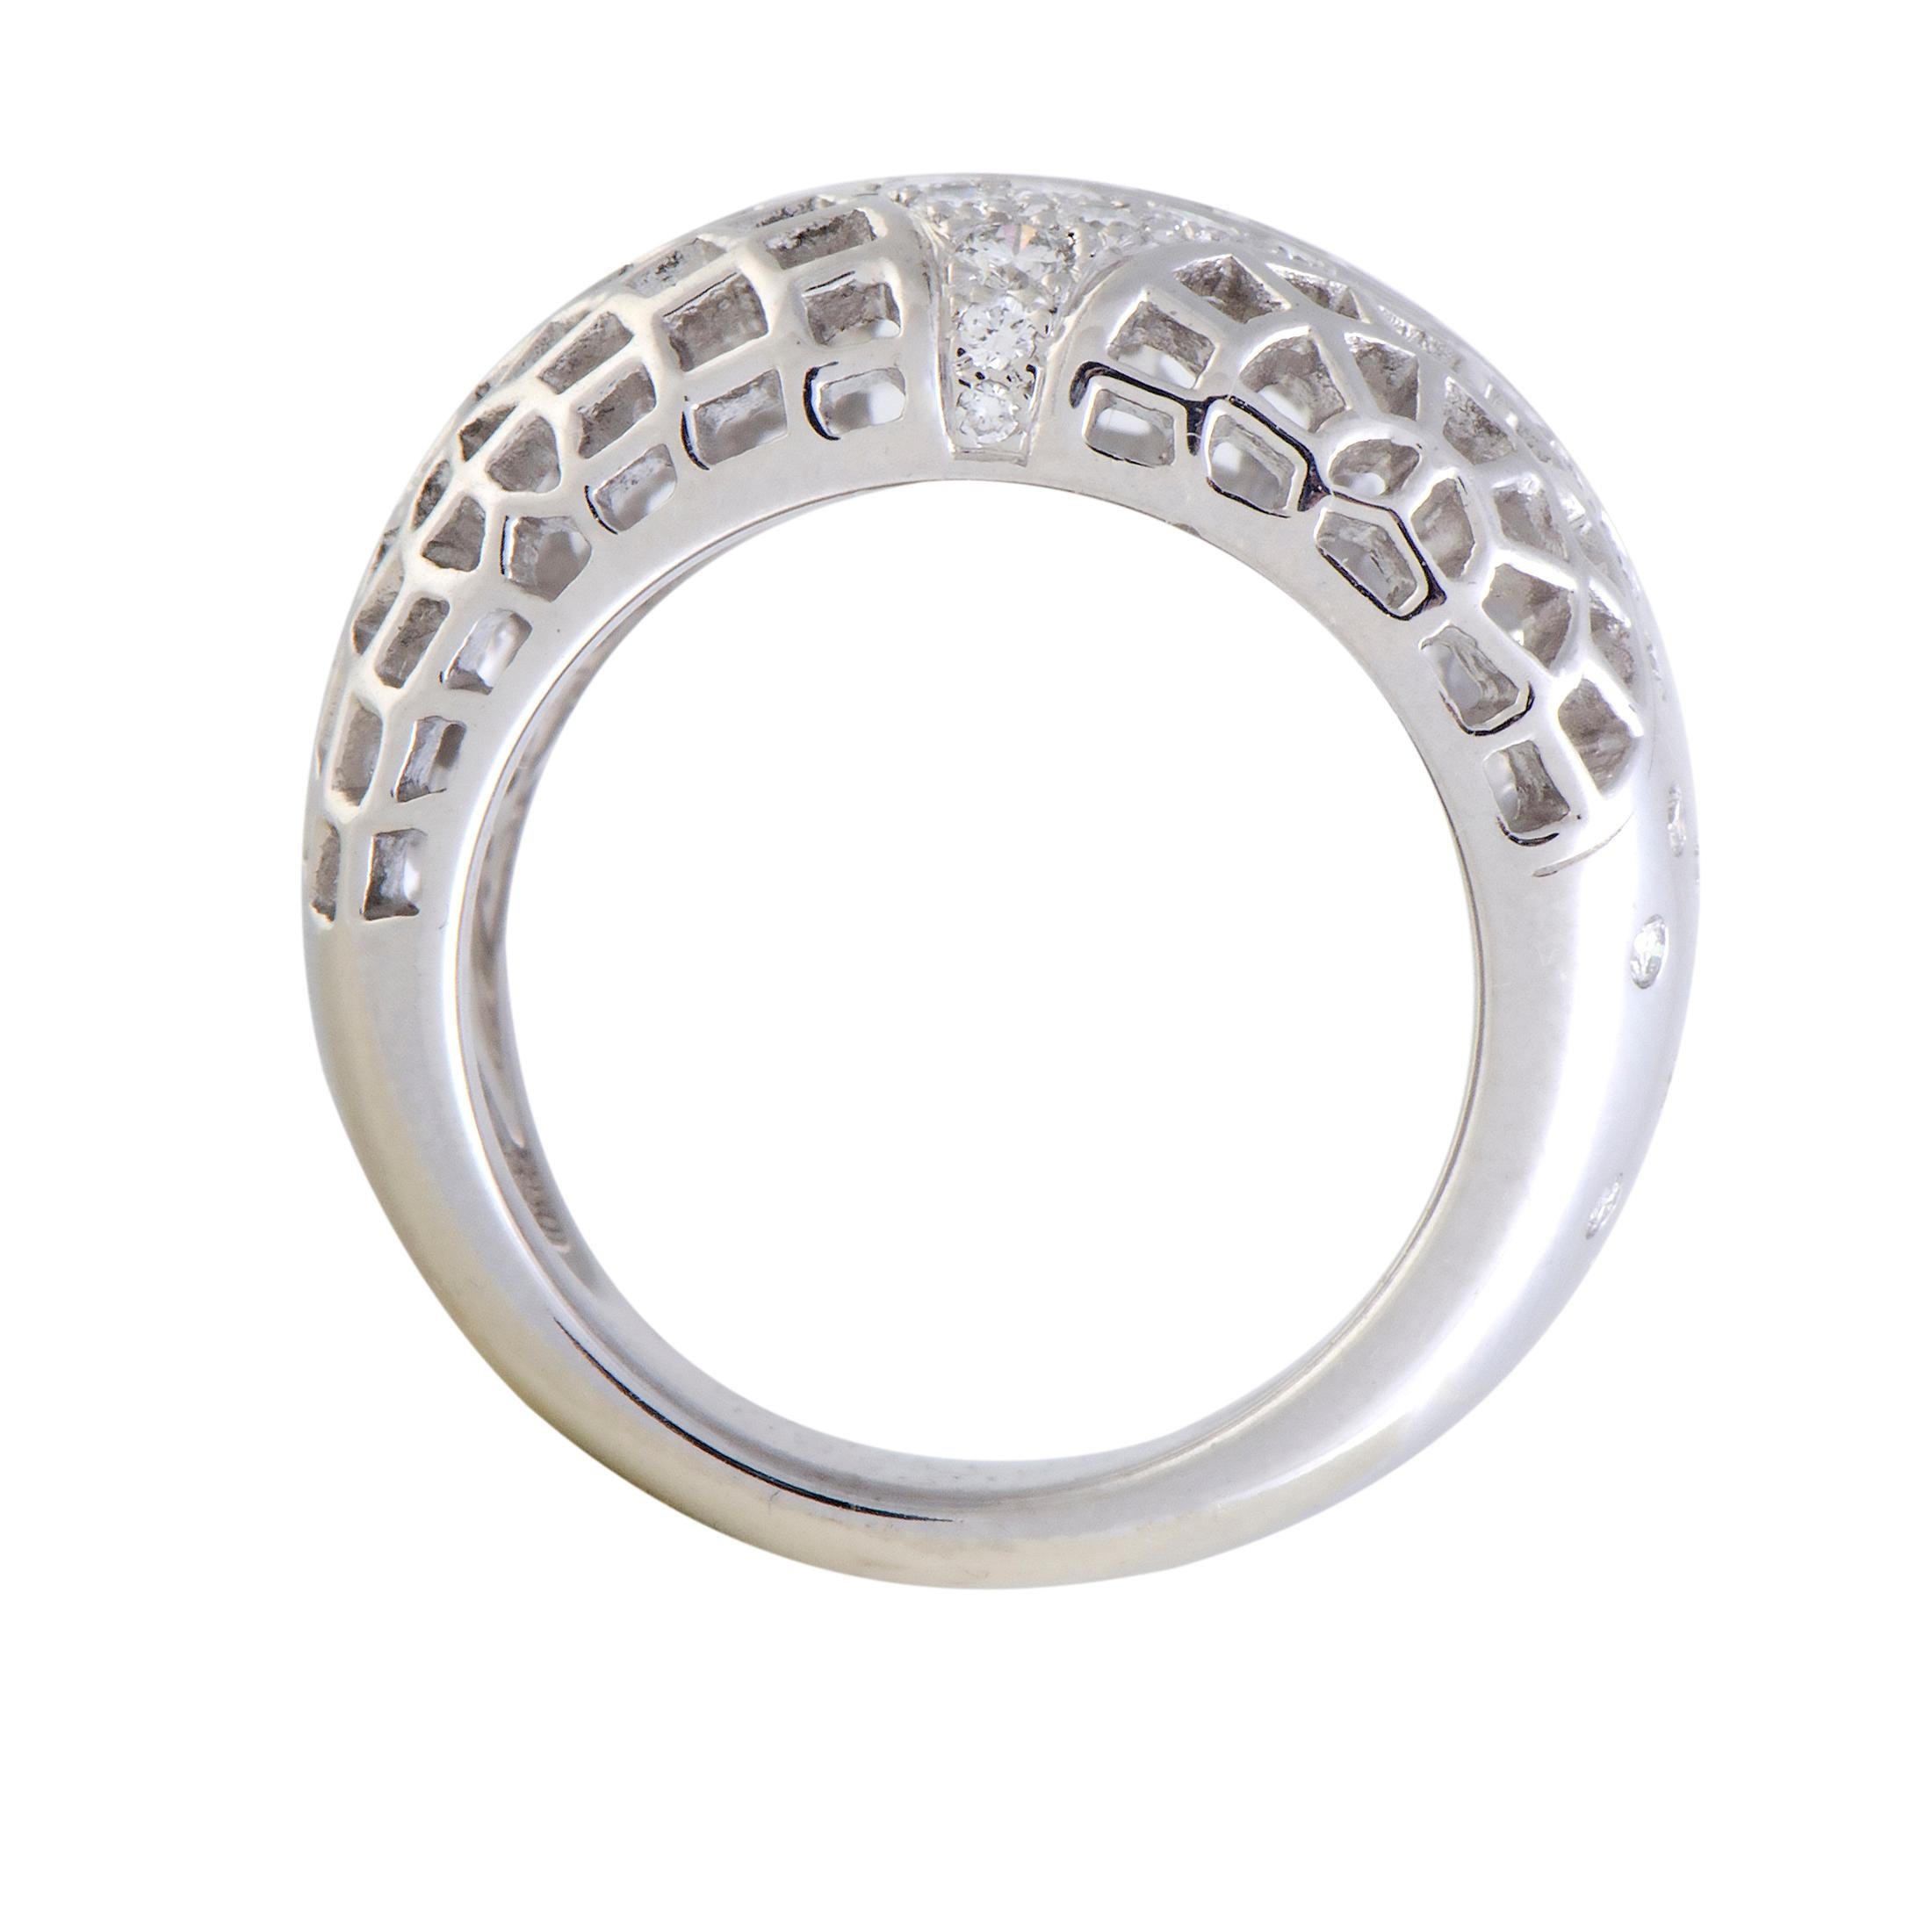 Dazzle your digits with this white gold ring characterized by its protruding design, half-moon mesh patterns and bedecked with a plethora of 0.47ct scintillating diamonds for everyday glamour. Crafted in 18K white gold by Cartier.

Ring Size: 6.75